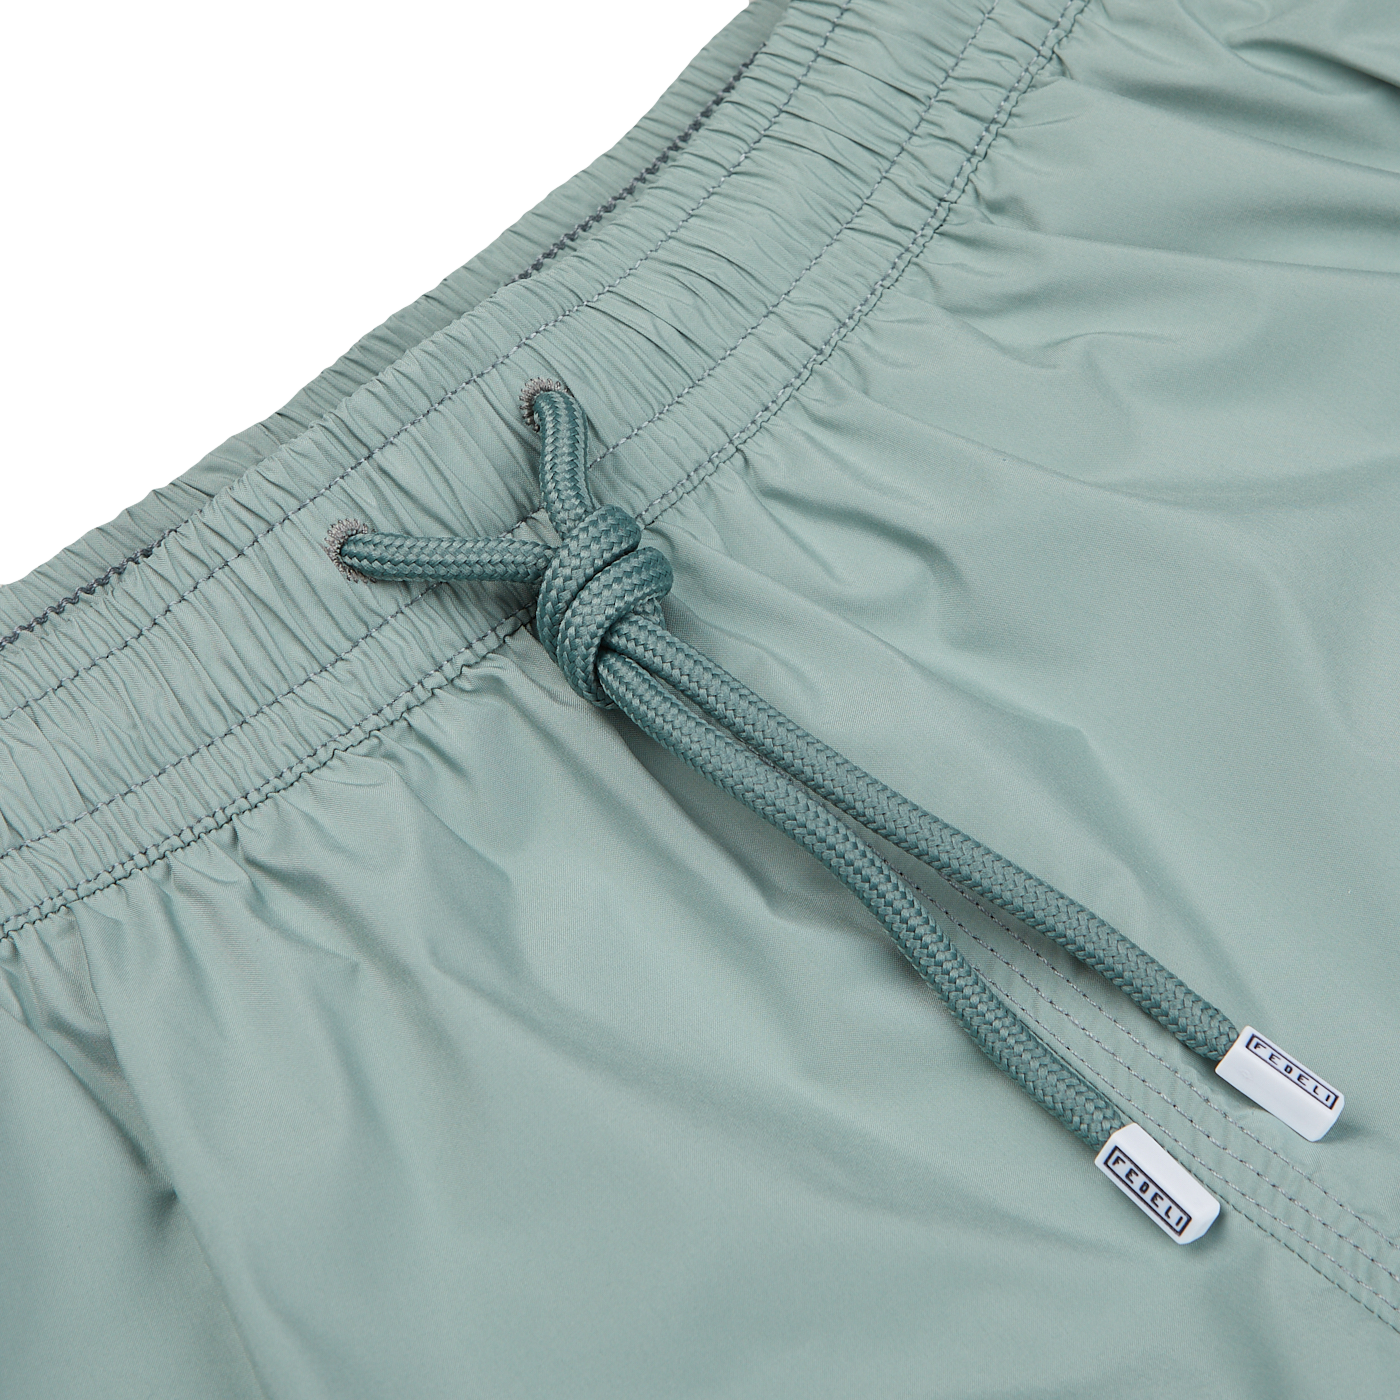 Close-up of a teal drawstring on Fedeli Sage Green Madeira Microfiber Swim Shorts with visible brand tags.